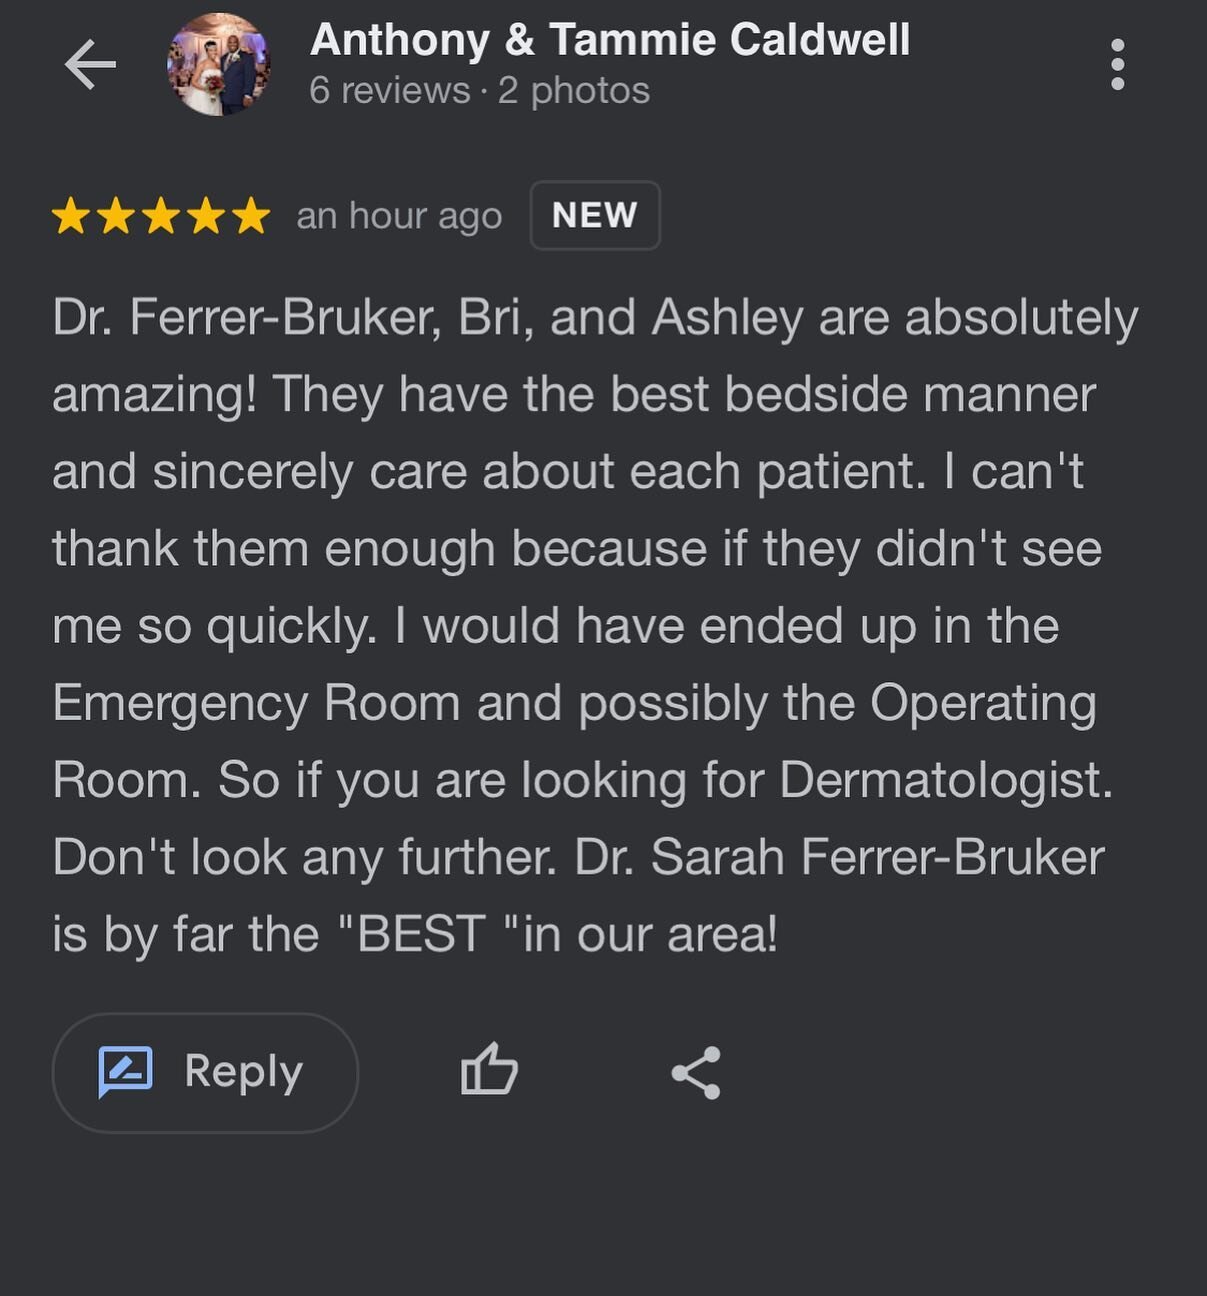 👆🏿👆🏽👆🏻❤️❤️❤️

This right here folks. This is what motivates us and lights up our days. 

#teamwork #dermatology #allages #allskintypes #weloveourpatients #boldcityderm